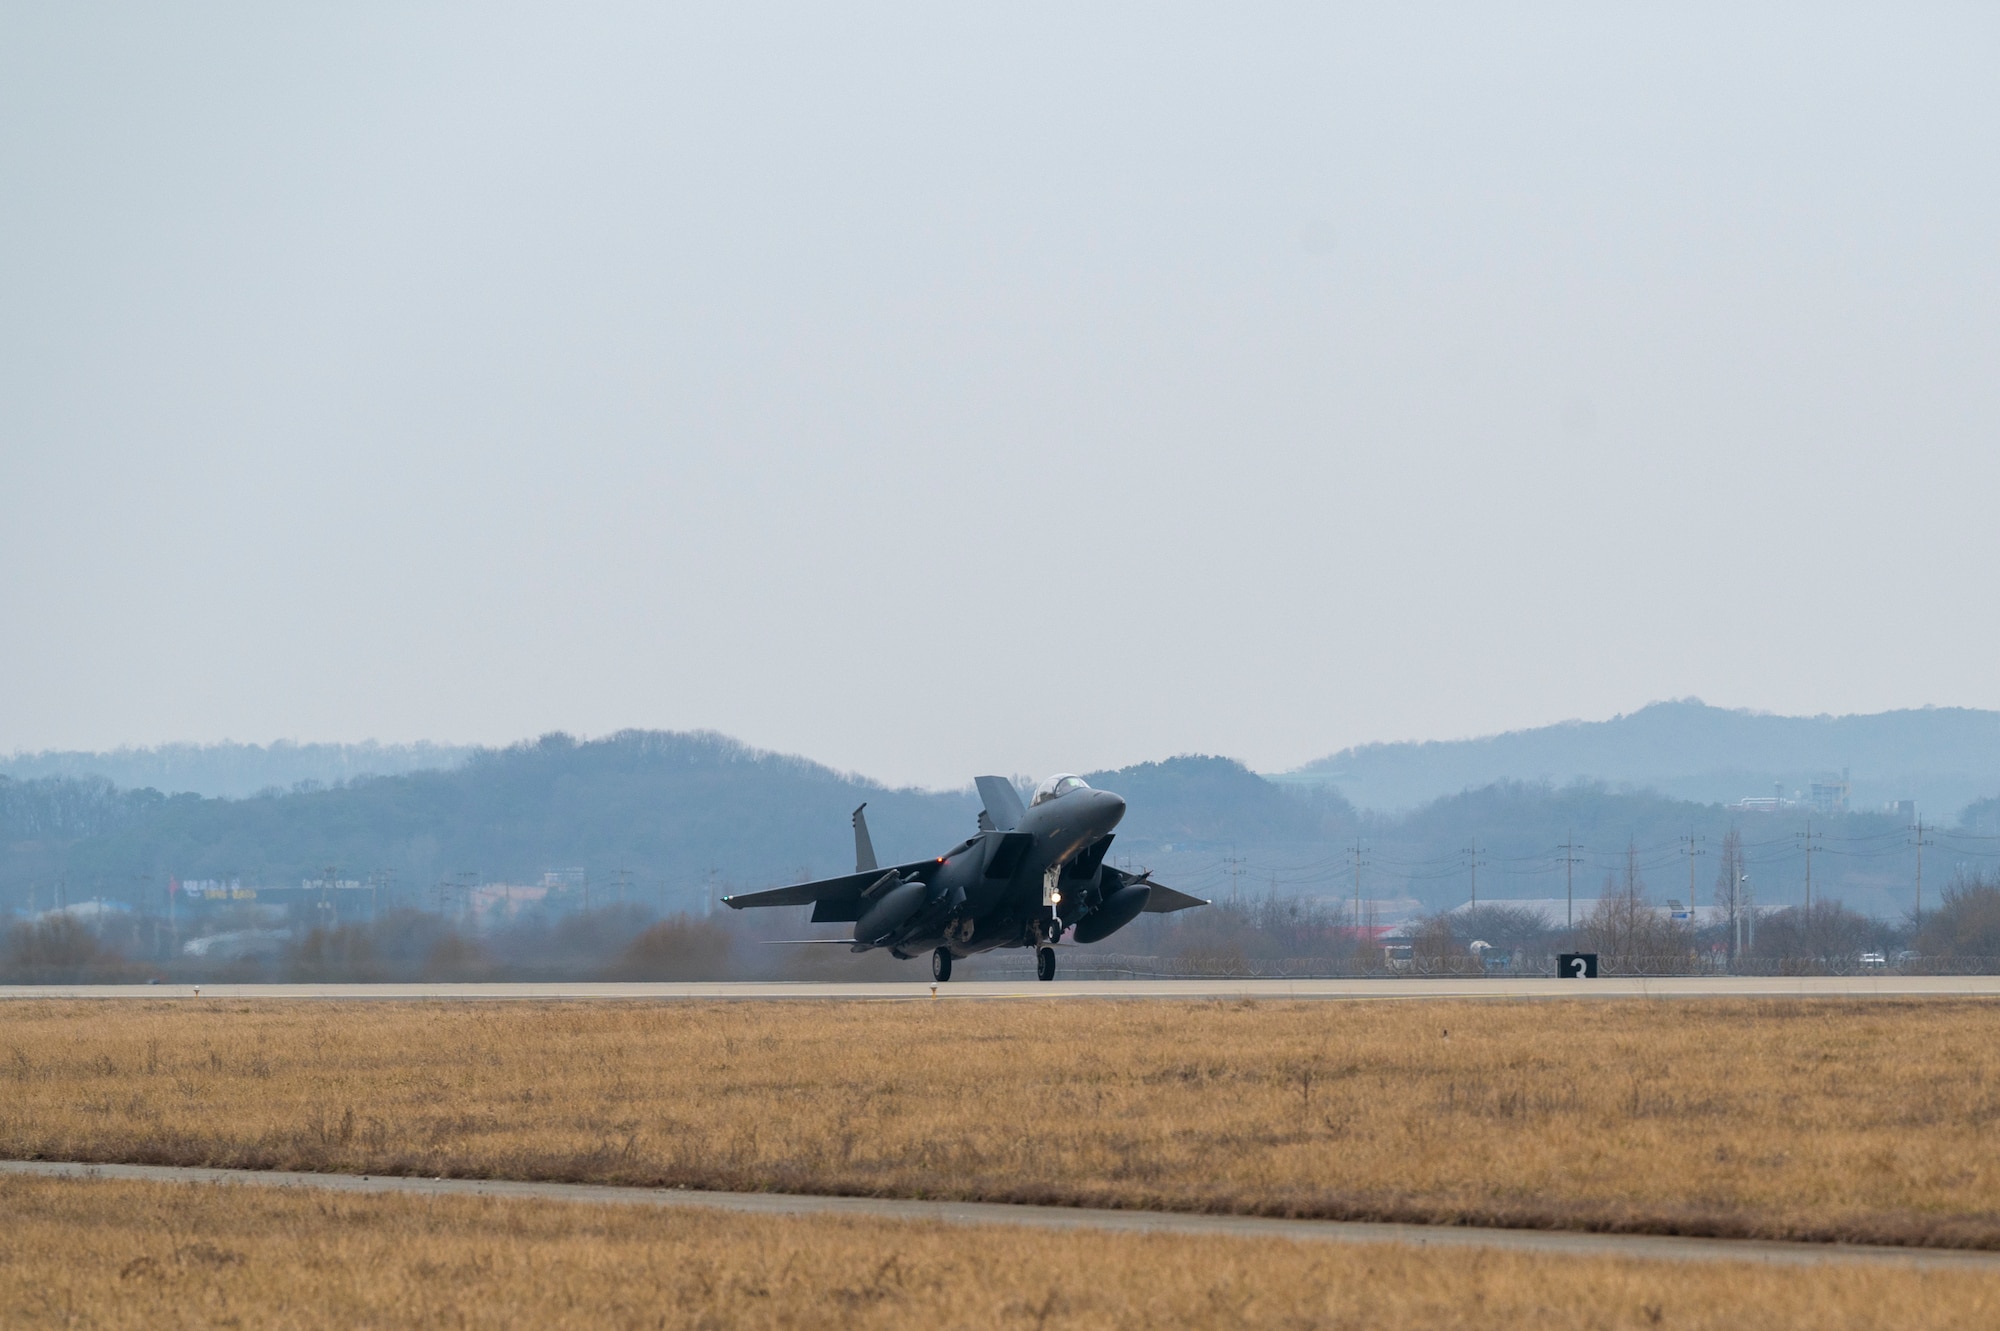 A Republic of Korea F-15K Slam Eagle assigned to the 122nd Fighter Squadron lands after a training mission during Buddy Squadron 24-2 at Osan Air Base, Republic of Korea, March 5, 2024. Buddy Squadron training events are held multiple times a year throughout the year at various U.S. Air Force and Republic of Korea Air Force bases to sharpen combined air combat tactics on the peninsula. The Buddy Squadron Program fosters objective-based training and improves interoperability between the U.S. and ROKAF fighter squadrons. (U.S. Air Force photo by Senior Airman Kaitlin Frazier)